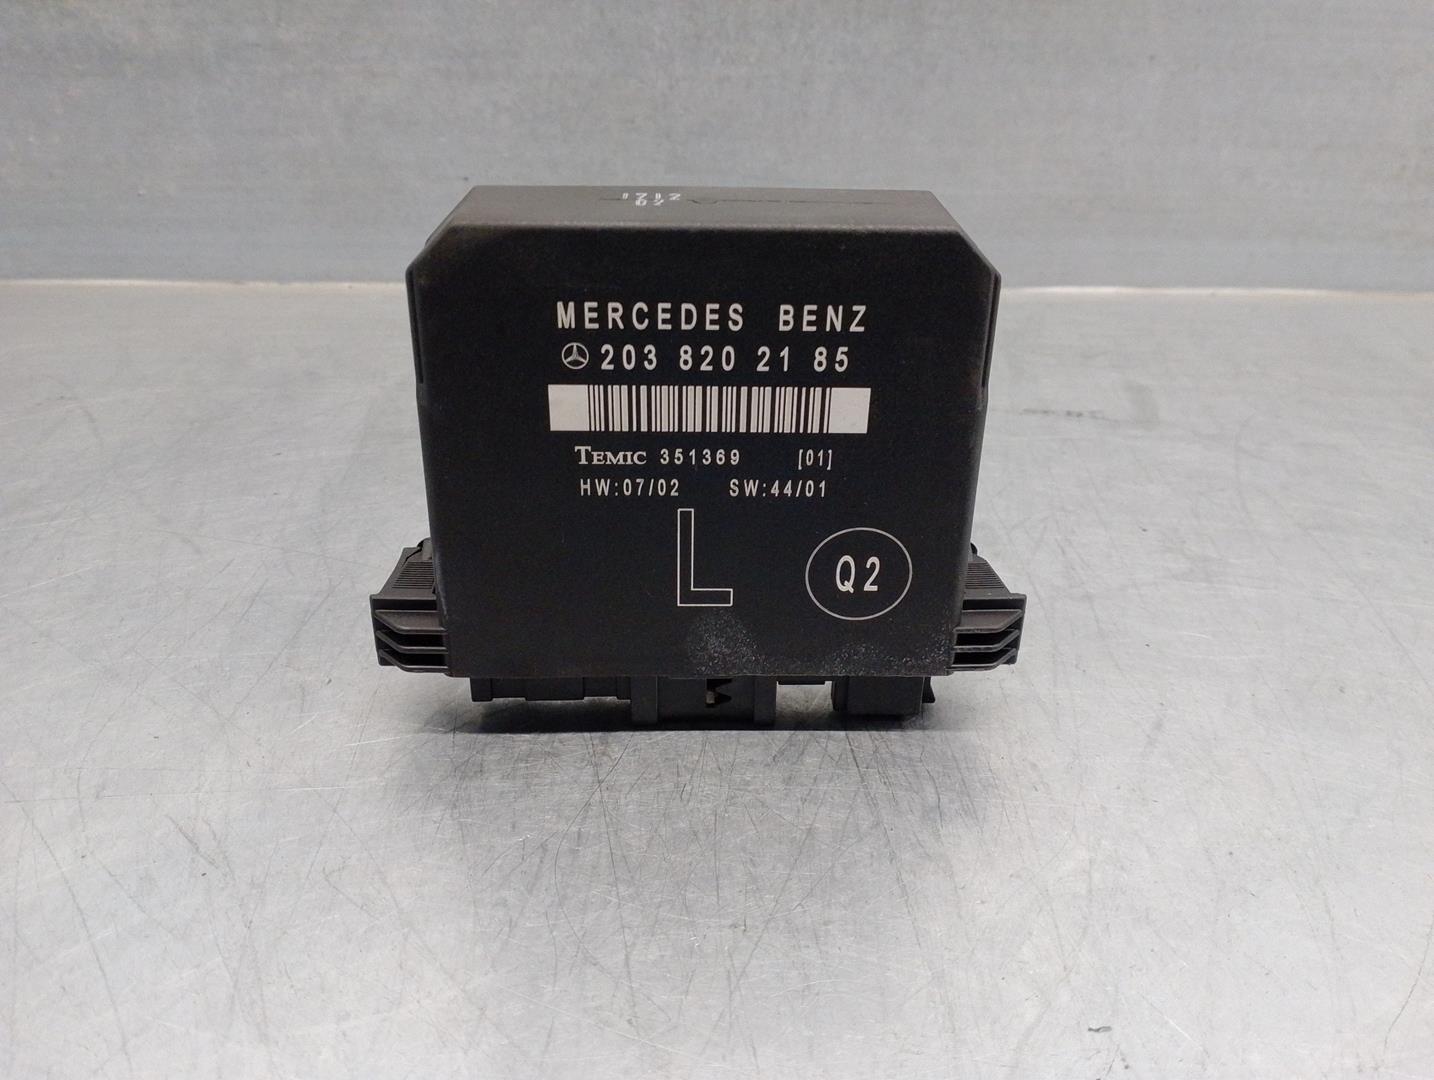 MERCEDES-BENZ C-Class W203/S203/CL203 (2000-2008) Other Control Units 2038202185, 351369, TEMIC 19915650